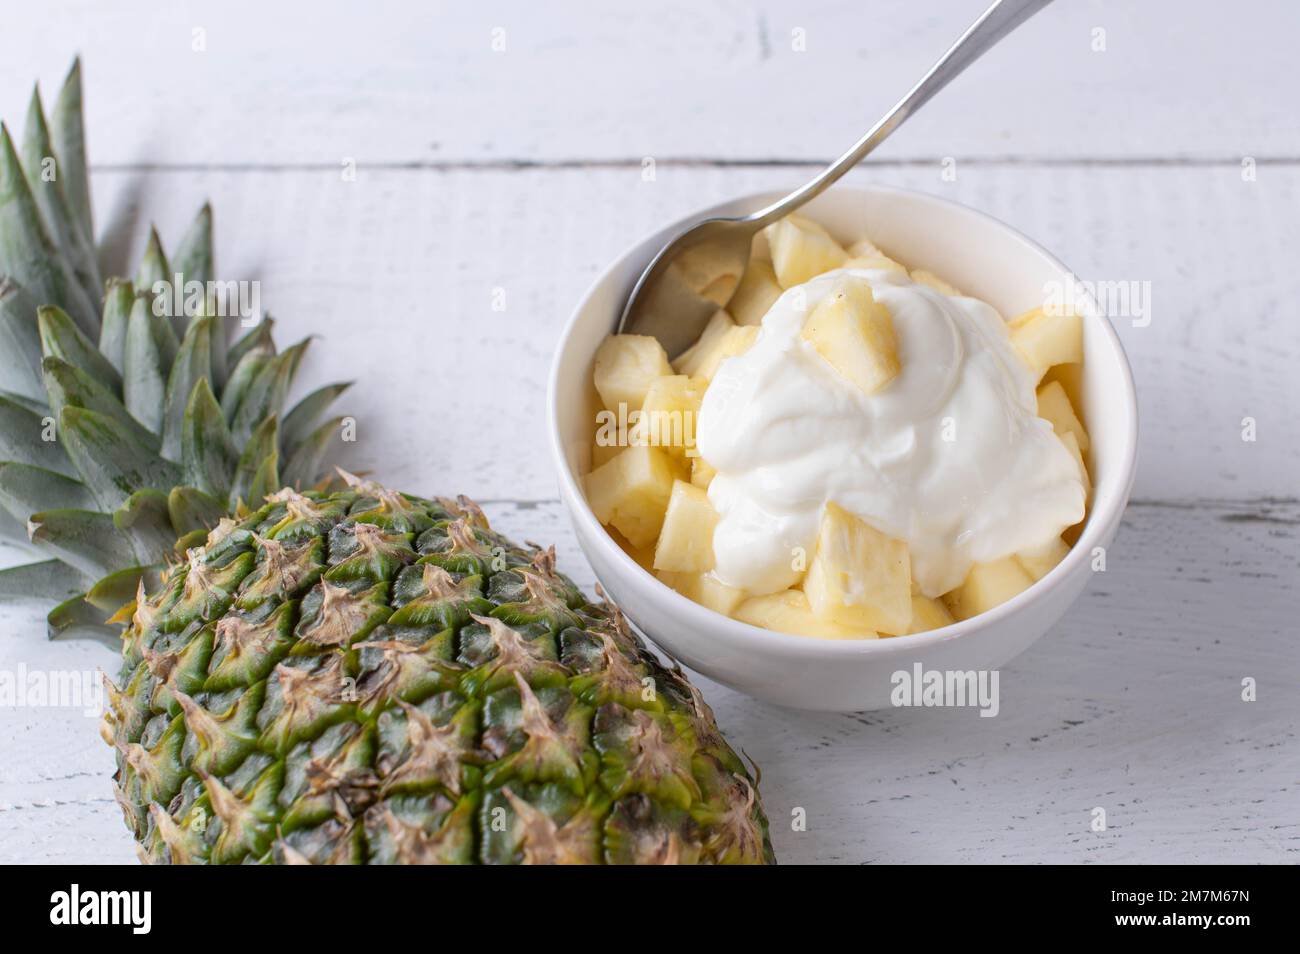 Post or pre workout meal or snack with chopped pineapple and high protein islandic skyr on white background with space for text Stock Photo